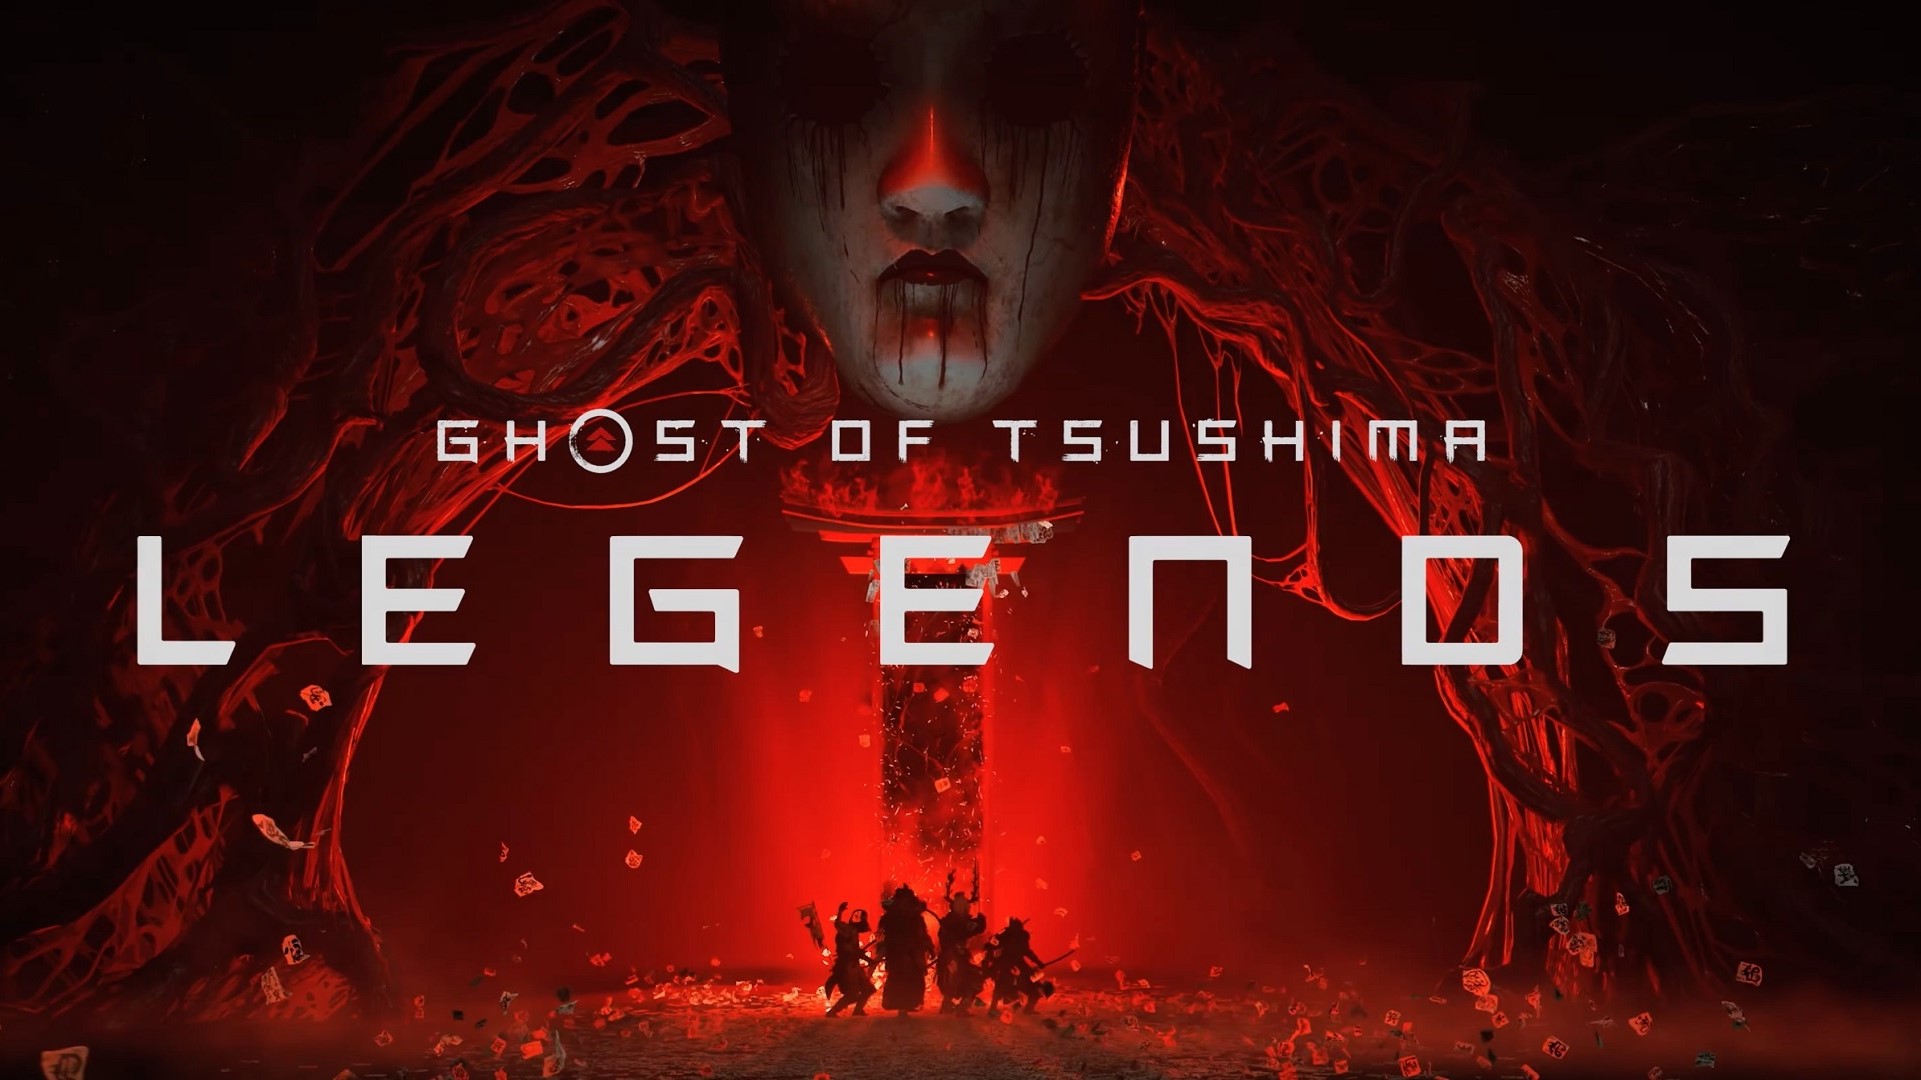 Ghost of Tsushima: Legends – The Tale of Iyo Raid Goes Live on October 30th